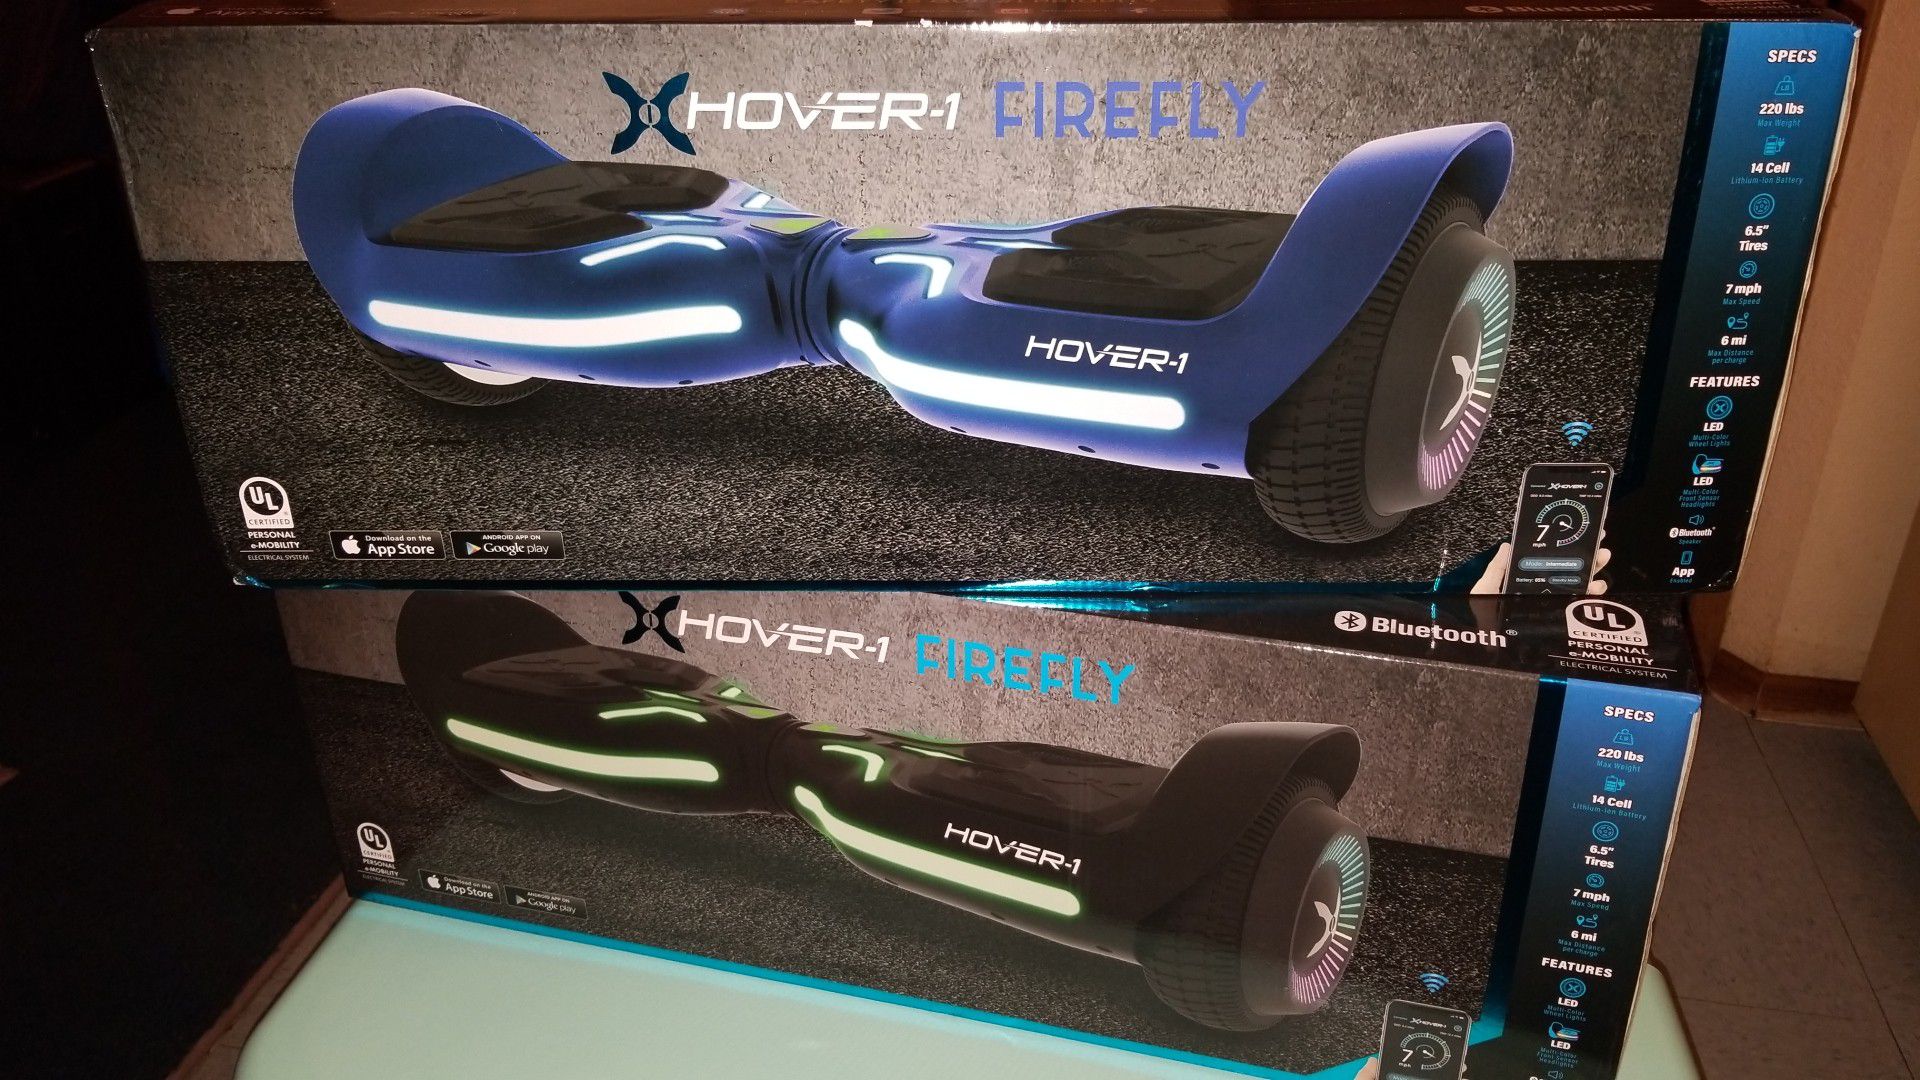 Firefly Hover-1 Hoverboards